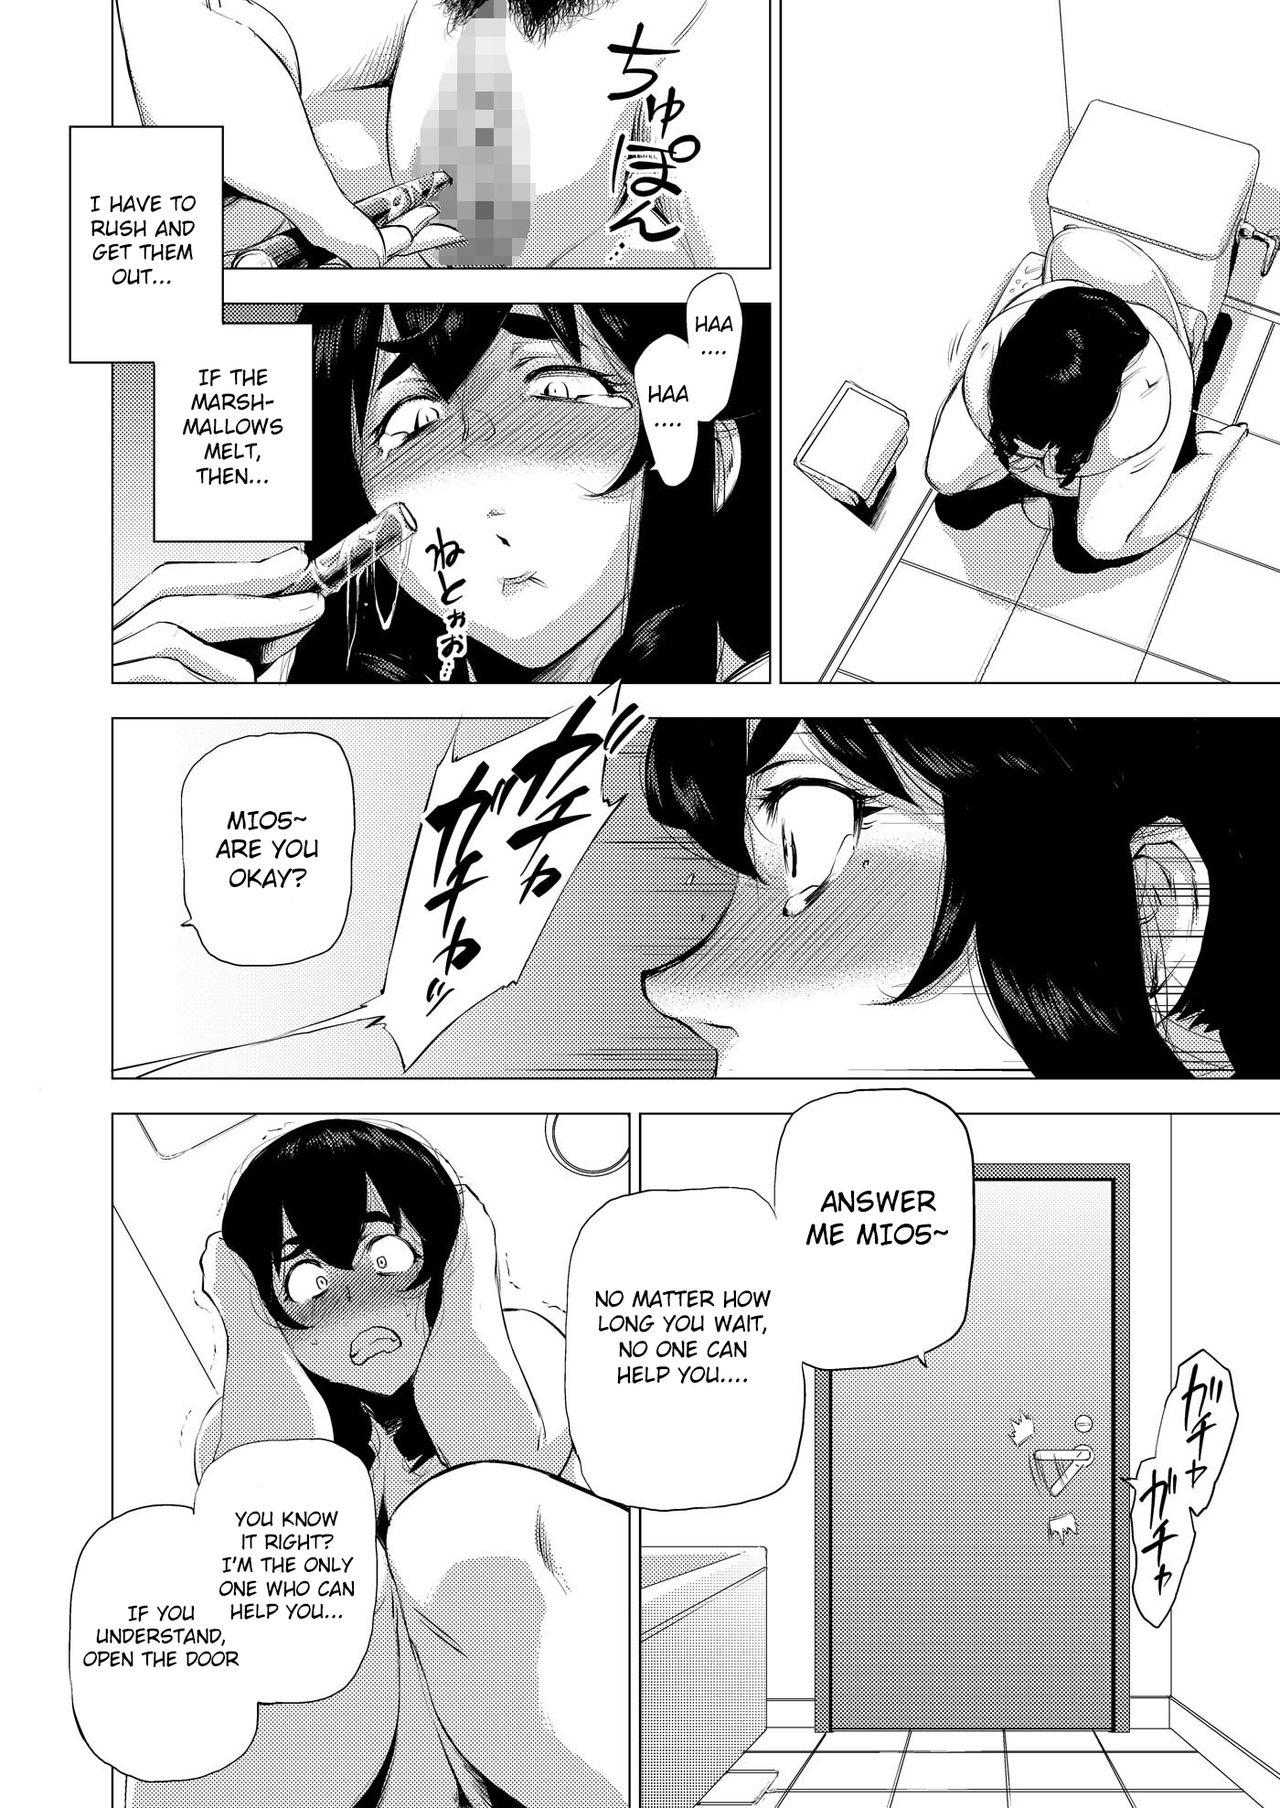 Pussy To Mouth MIO5 HaraMarsh - Ojisan to marshmallow Star - Page 11